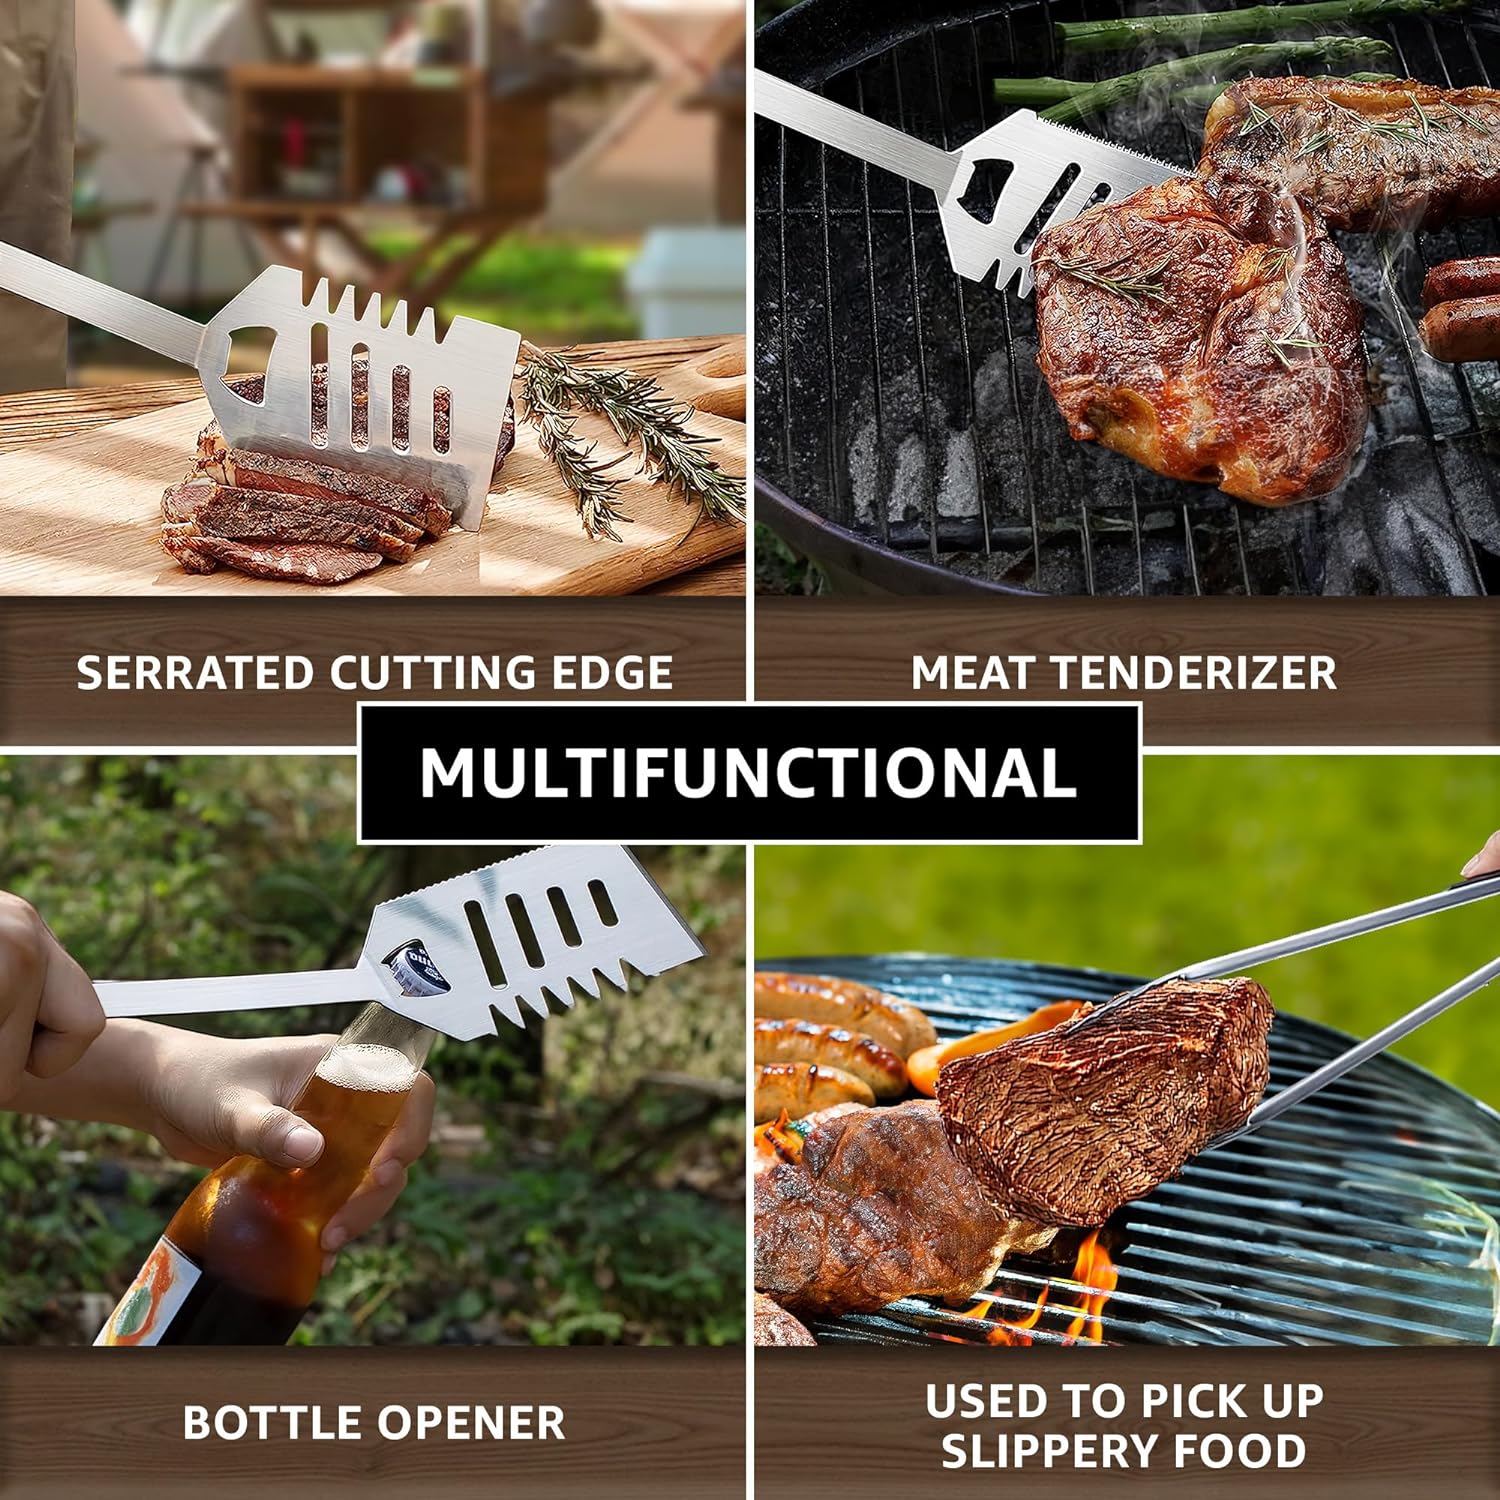 Macorner 25pcs Stainless Steel BBQ Grill Tool Set for Men - Grilling Accessories for Outdoor - Gift for Birthday Father's Day Christmas for Men Dad Grandpa Papa - Barbecue Tool Kit with Aluminum Case